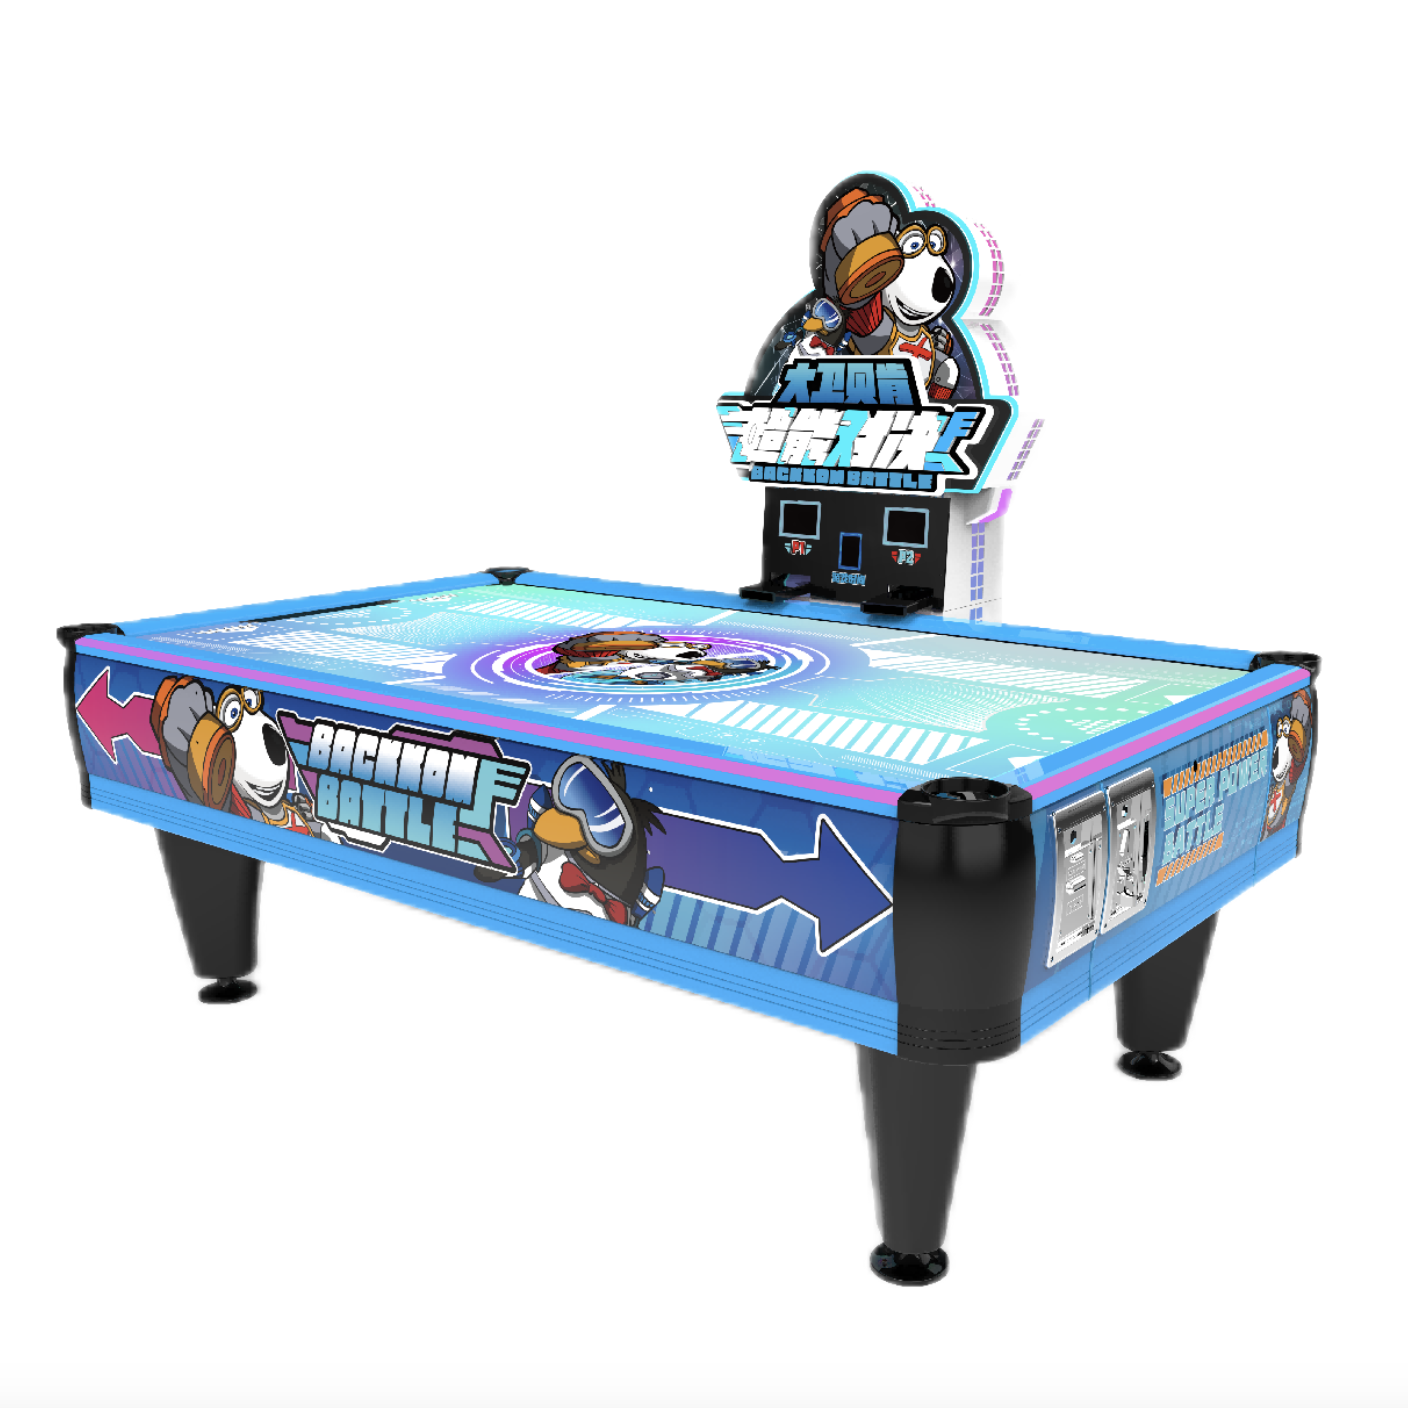 High Quality Air Hockey Table Arcade Game For Sale Made In China